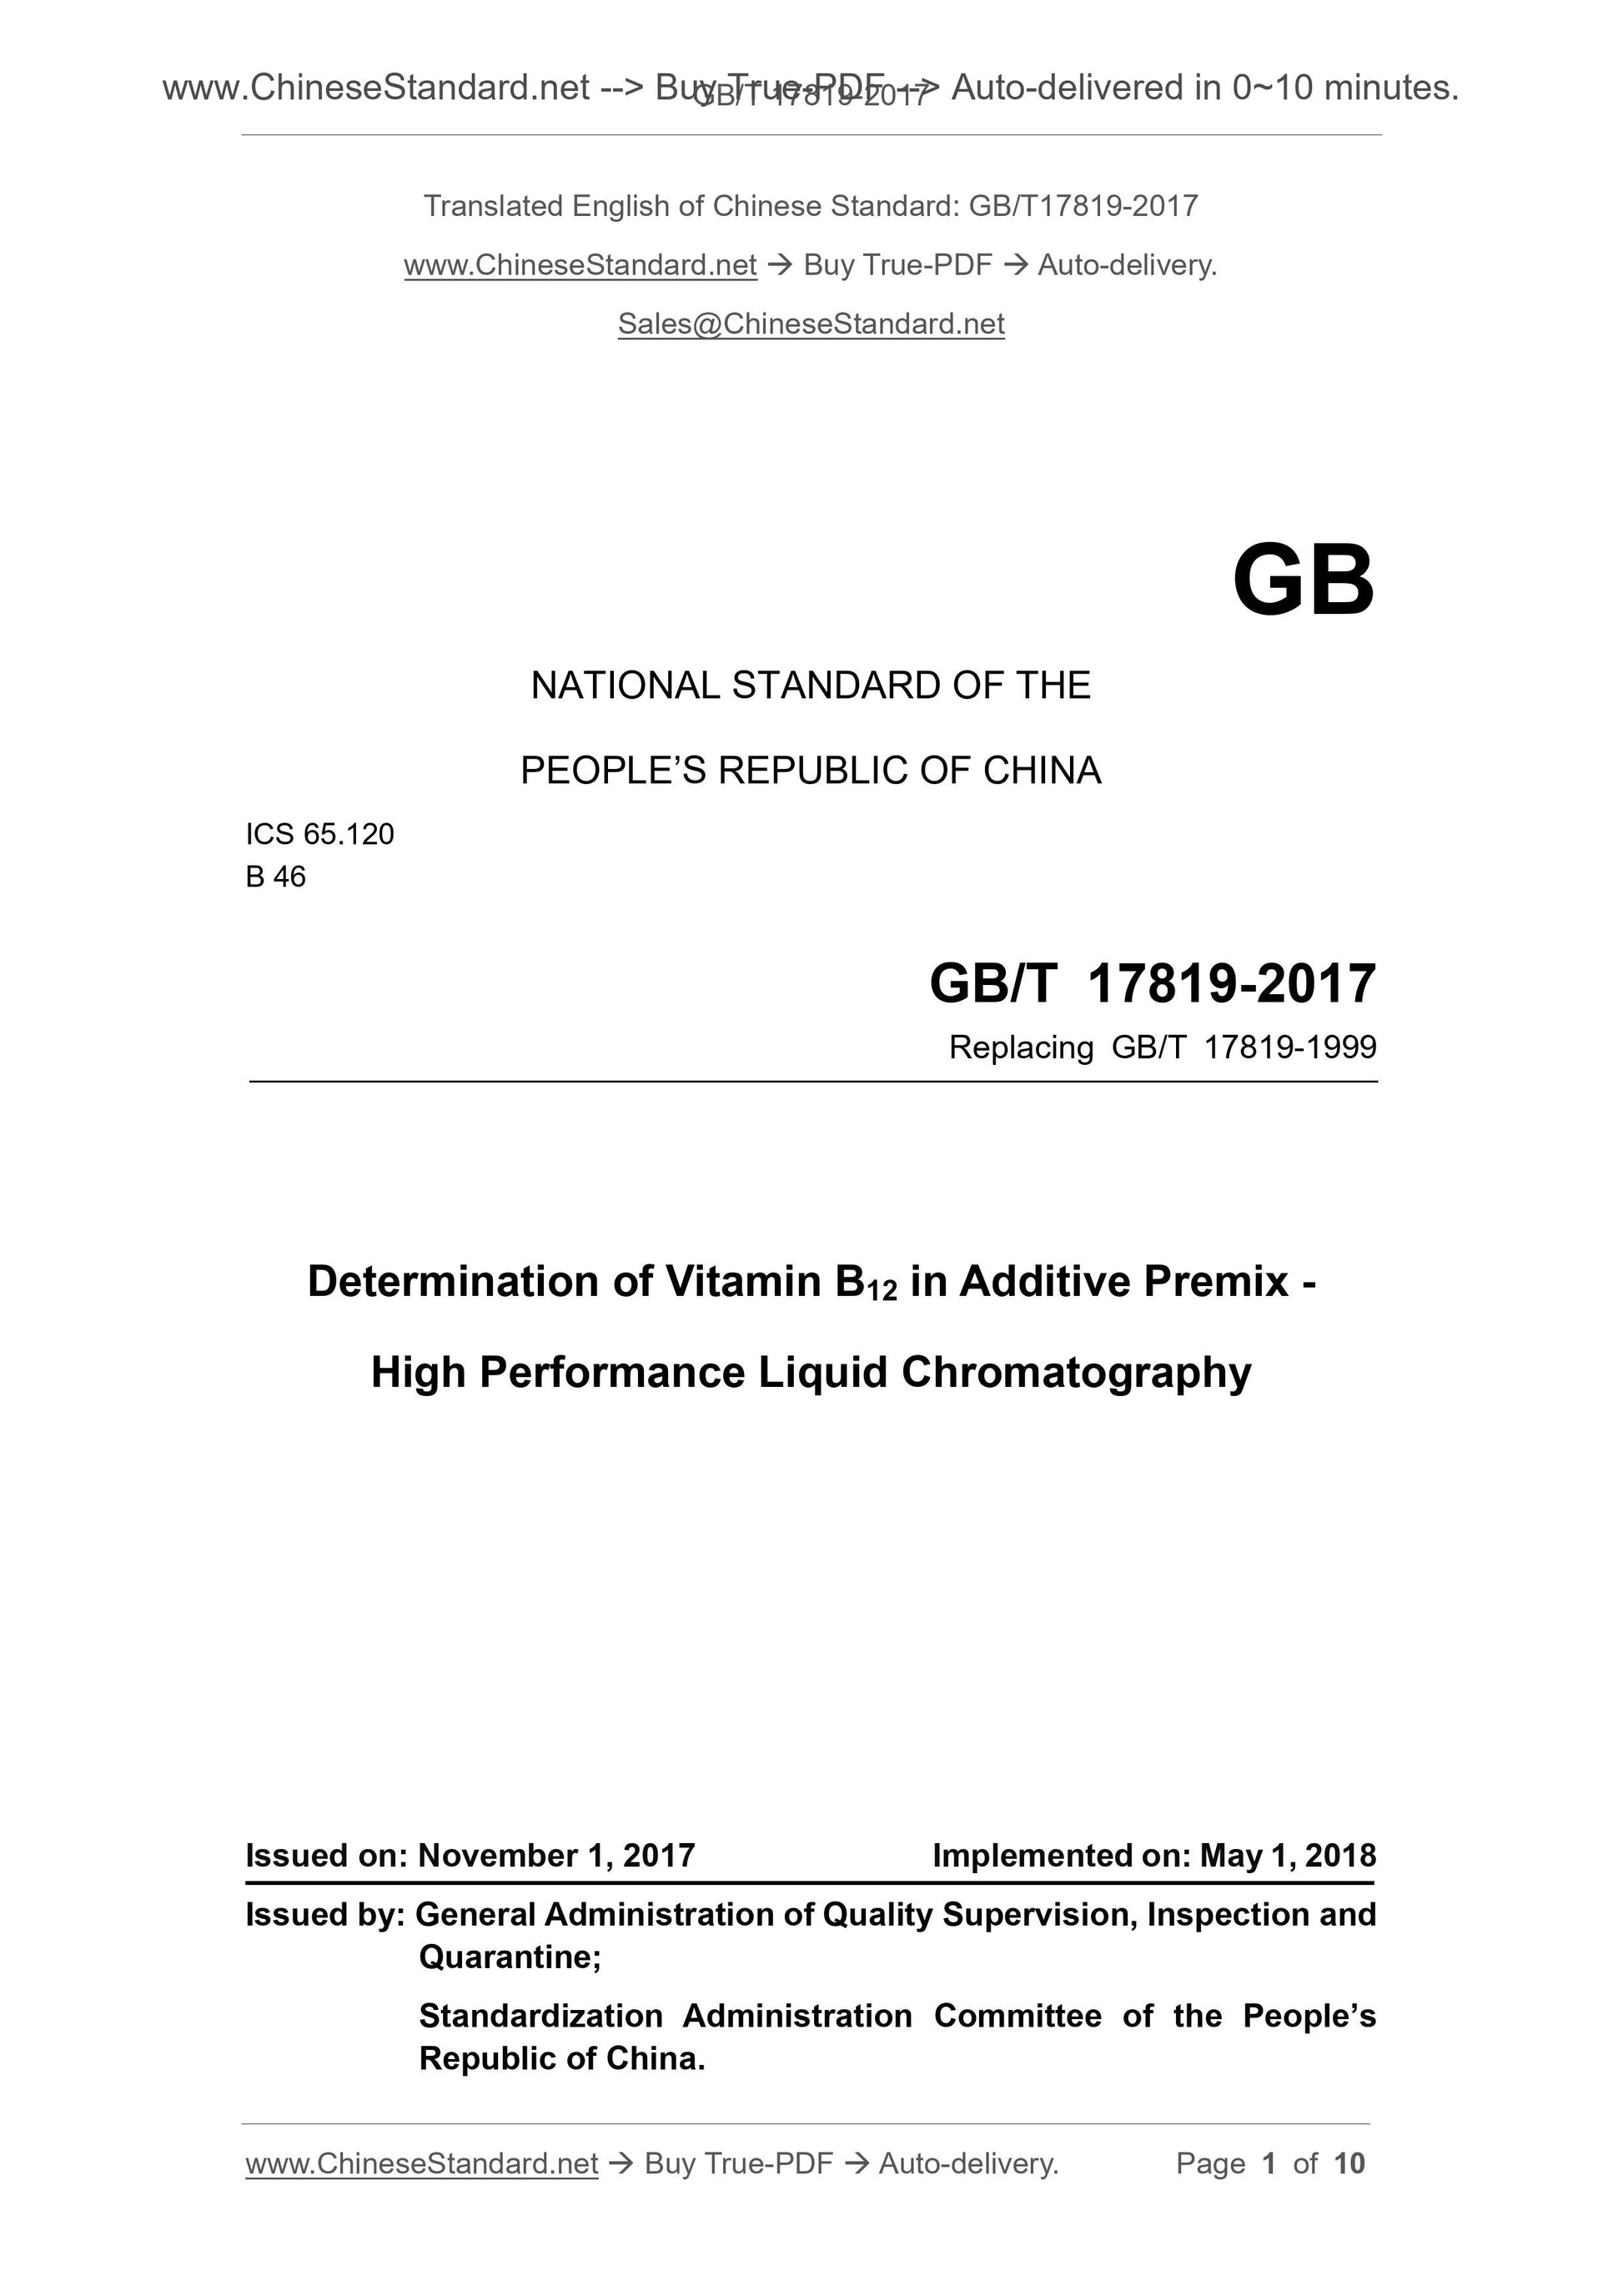 GB/T 17819-2017 Page 1